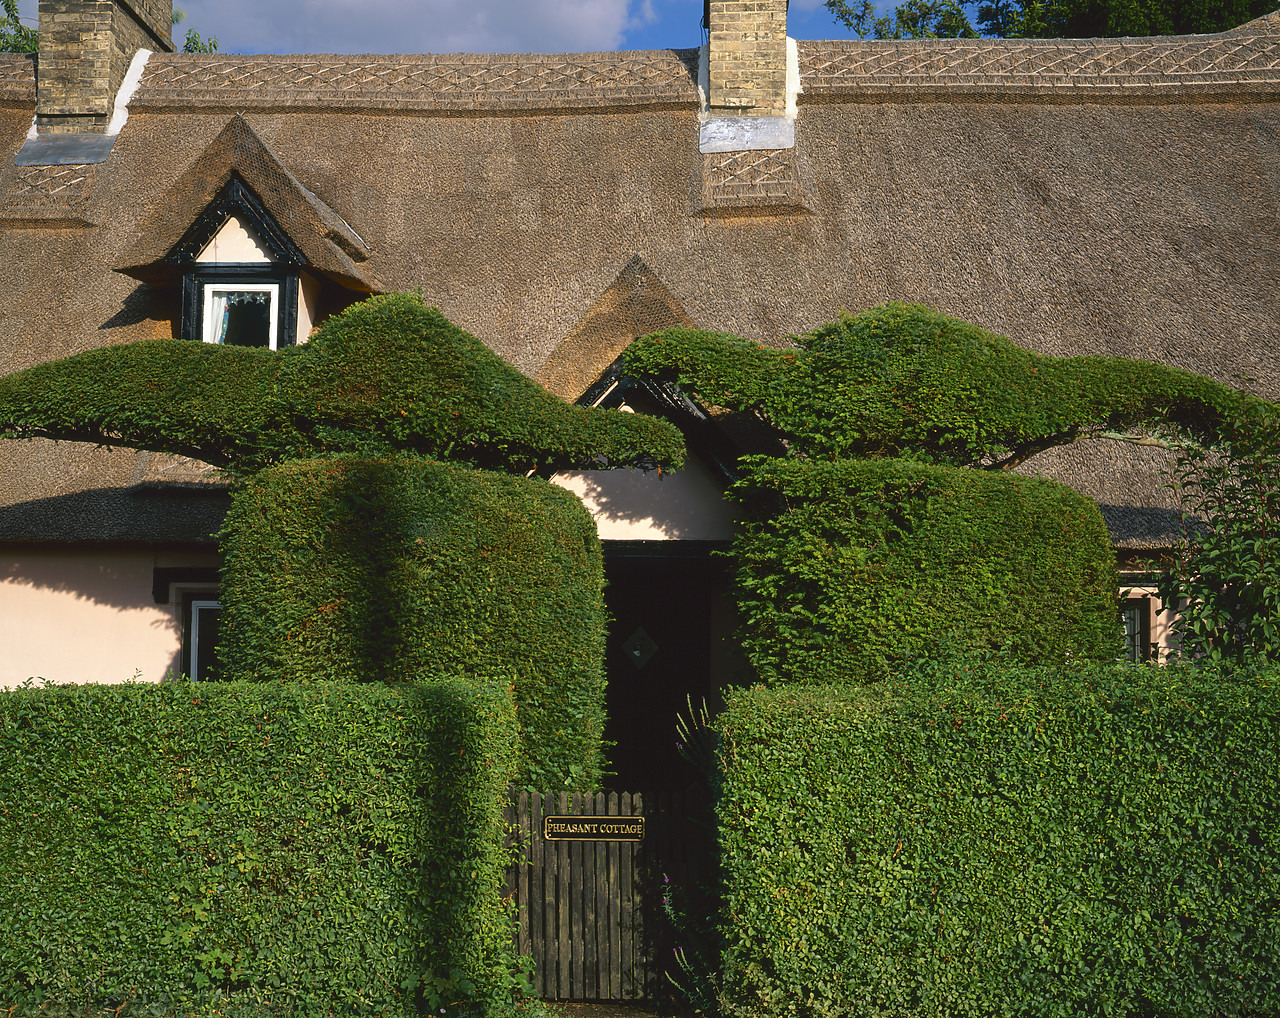 #200542-6 - Topiary Hedge & Thatch Cottage, Horringer, Suffolk, England